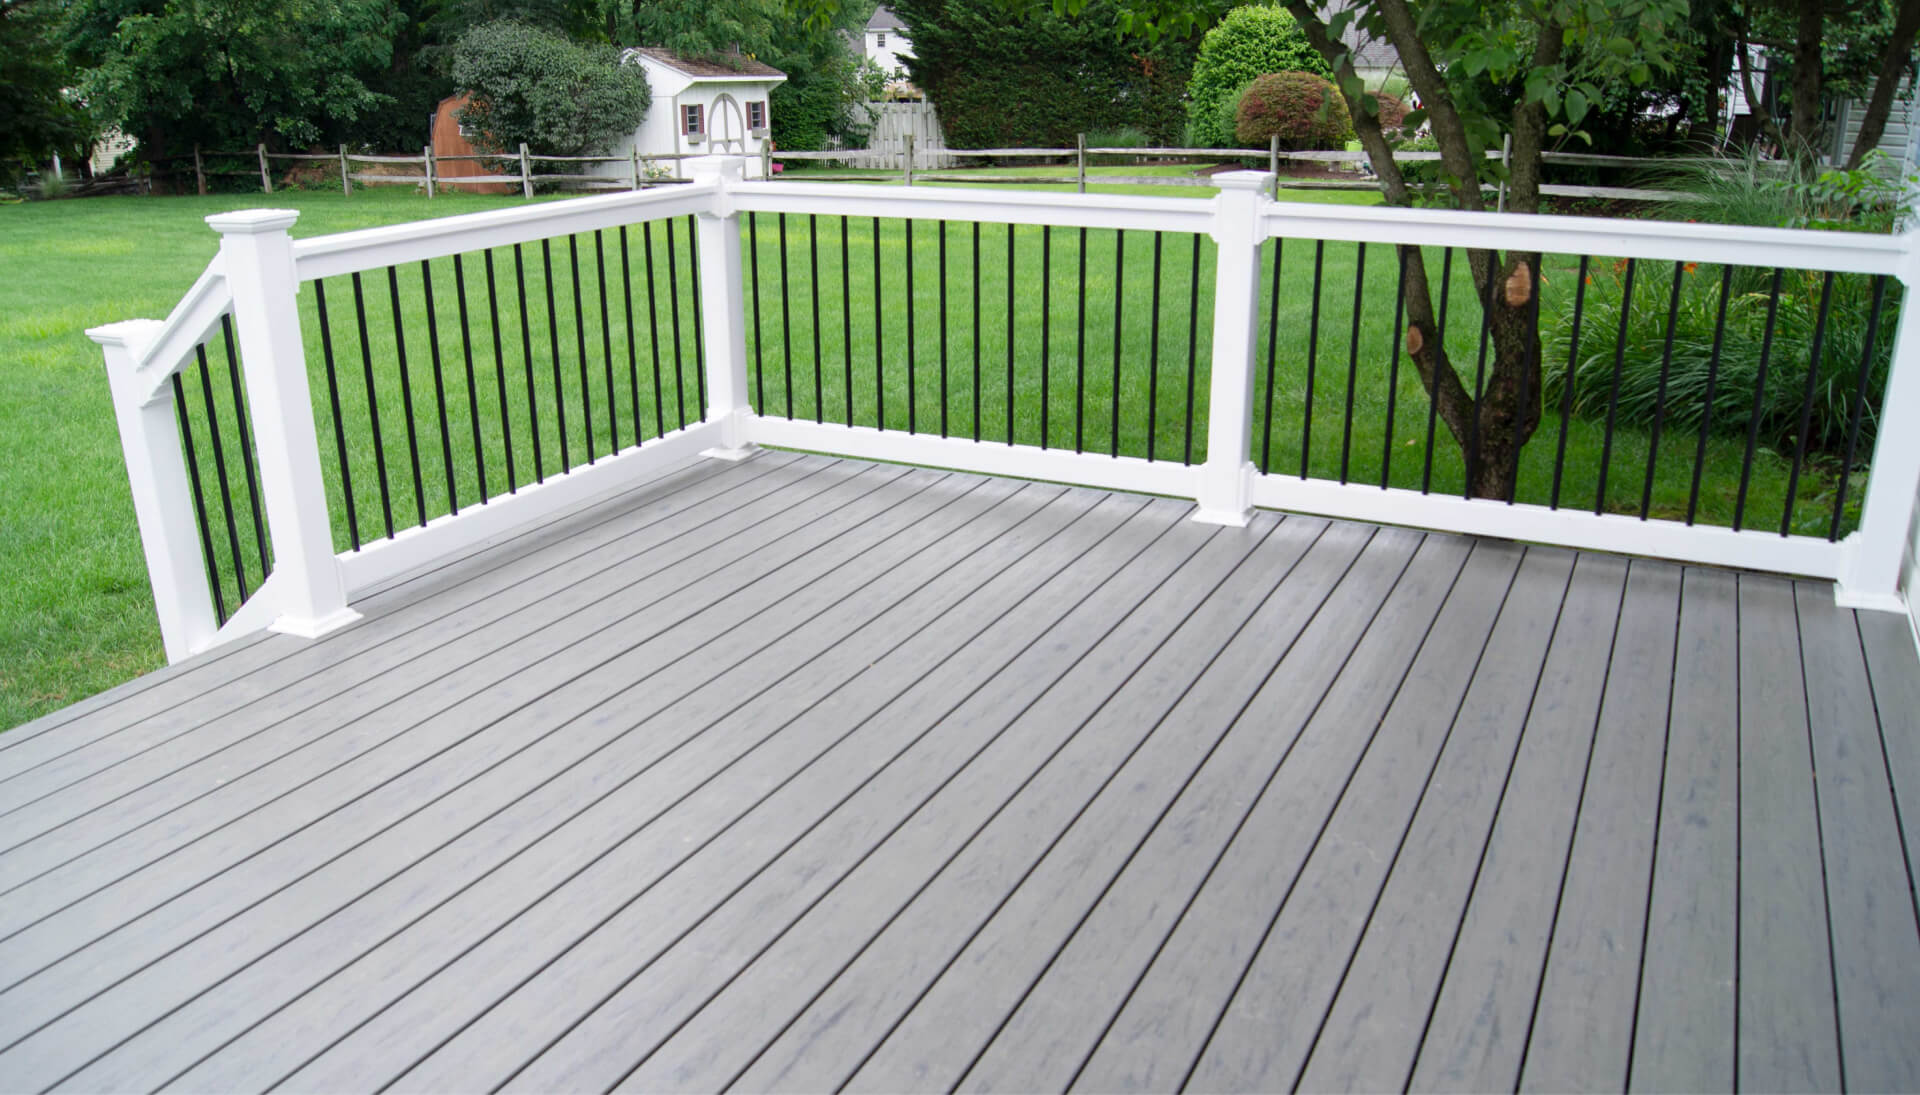 Specialists in deck railing and covers Savannah, Georgia